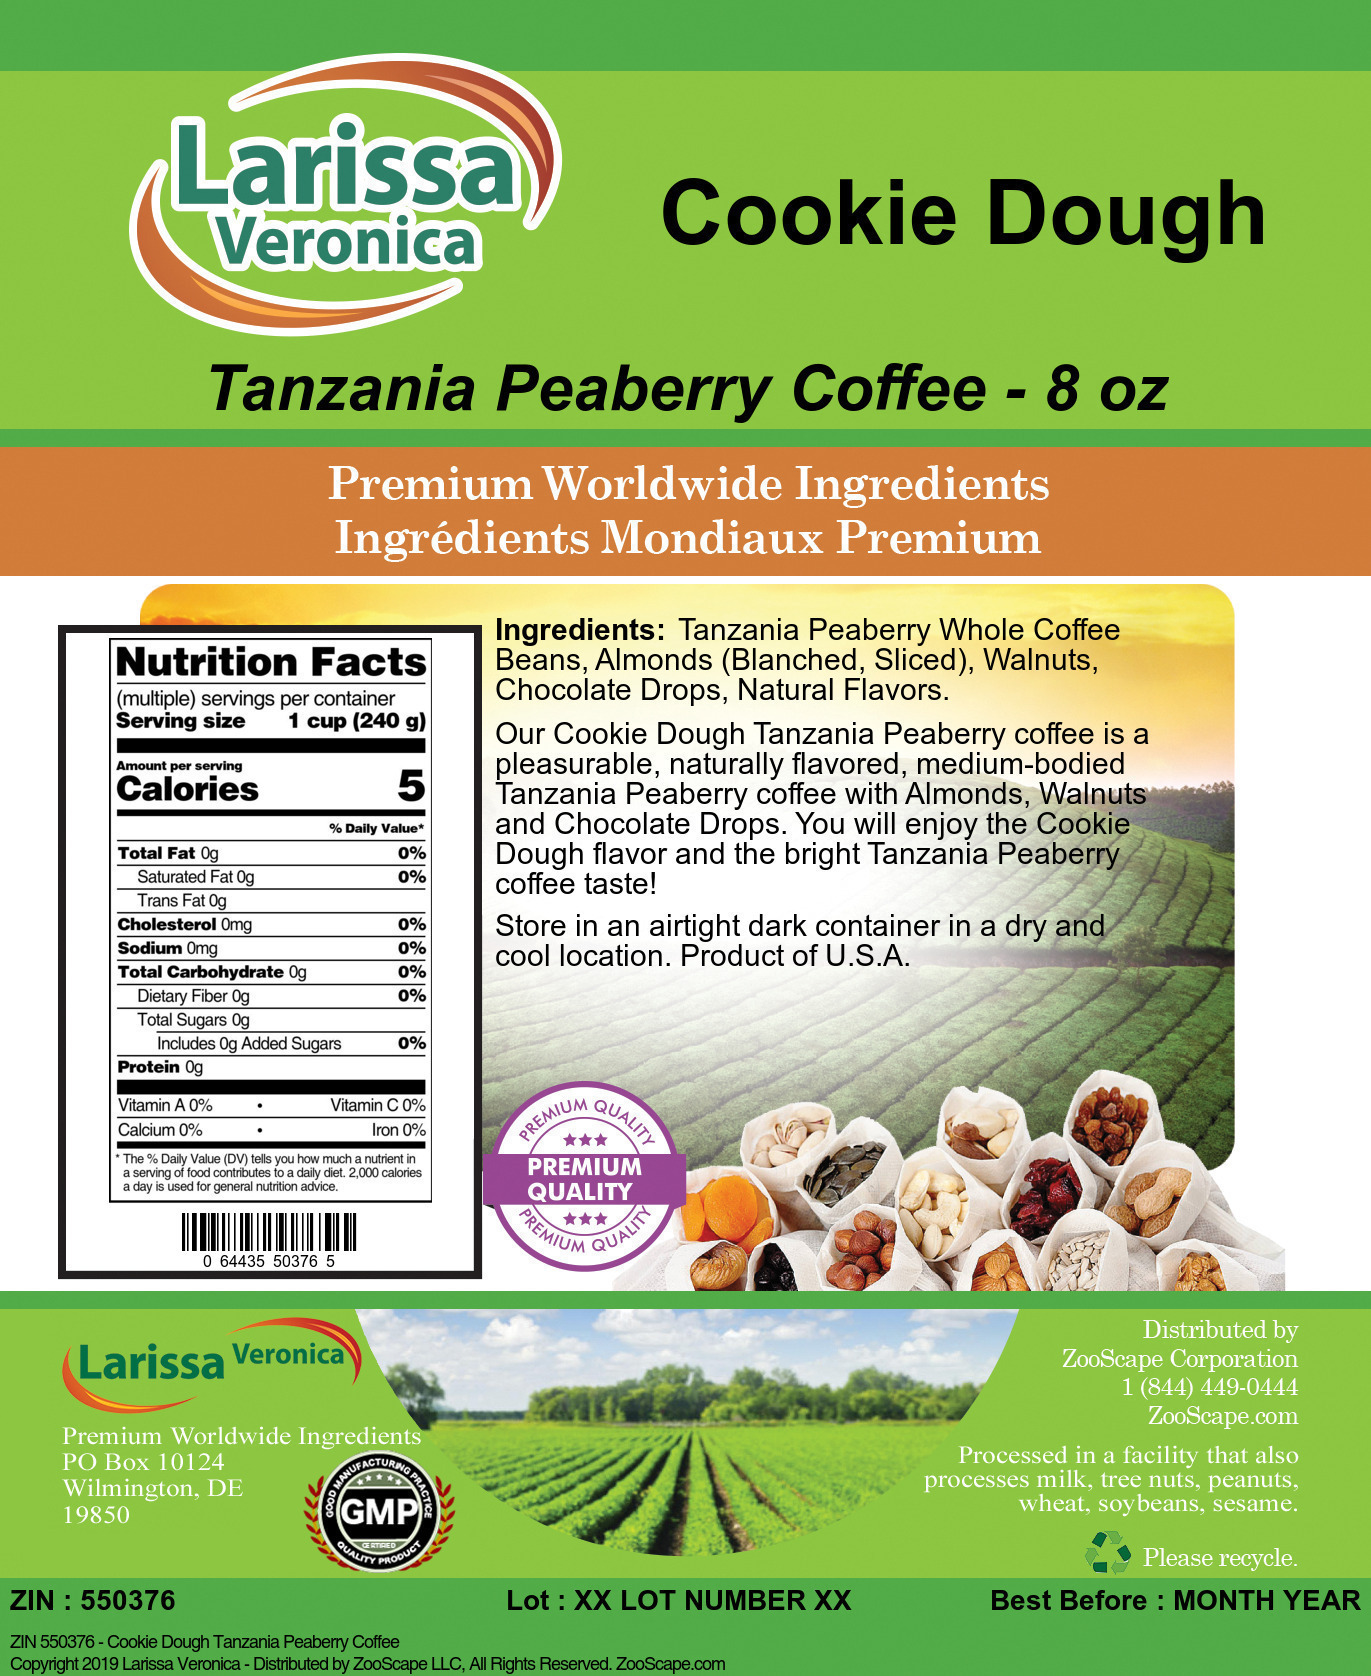 Cookie Dough Tanzania Peaberry Coffee - Label